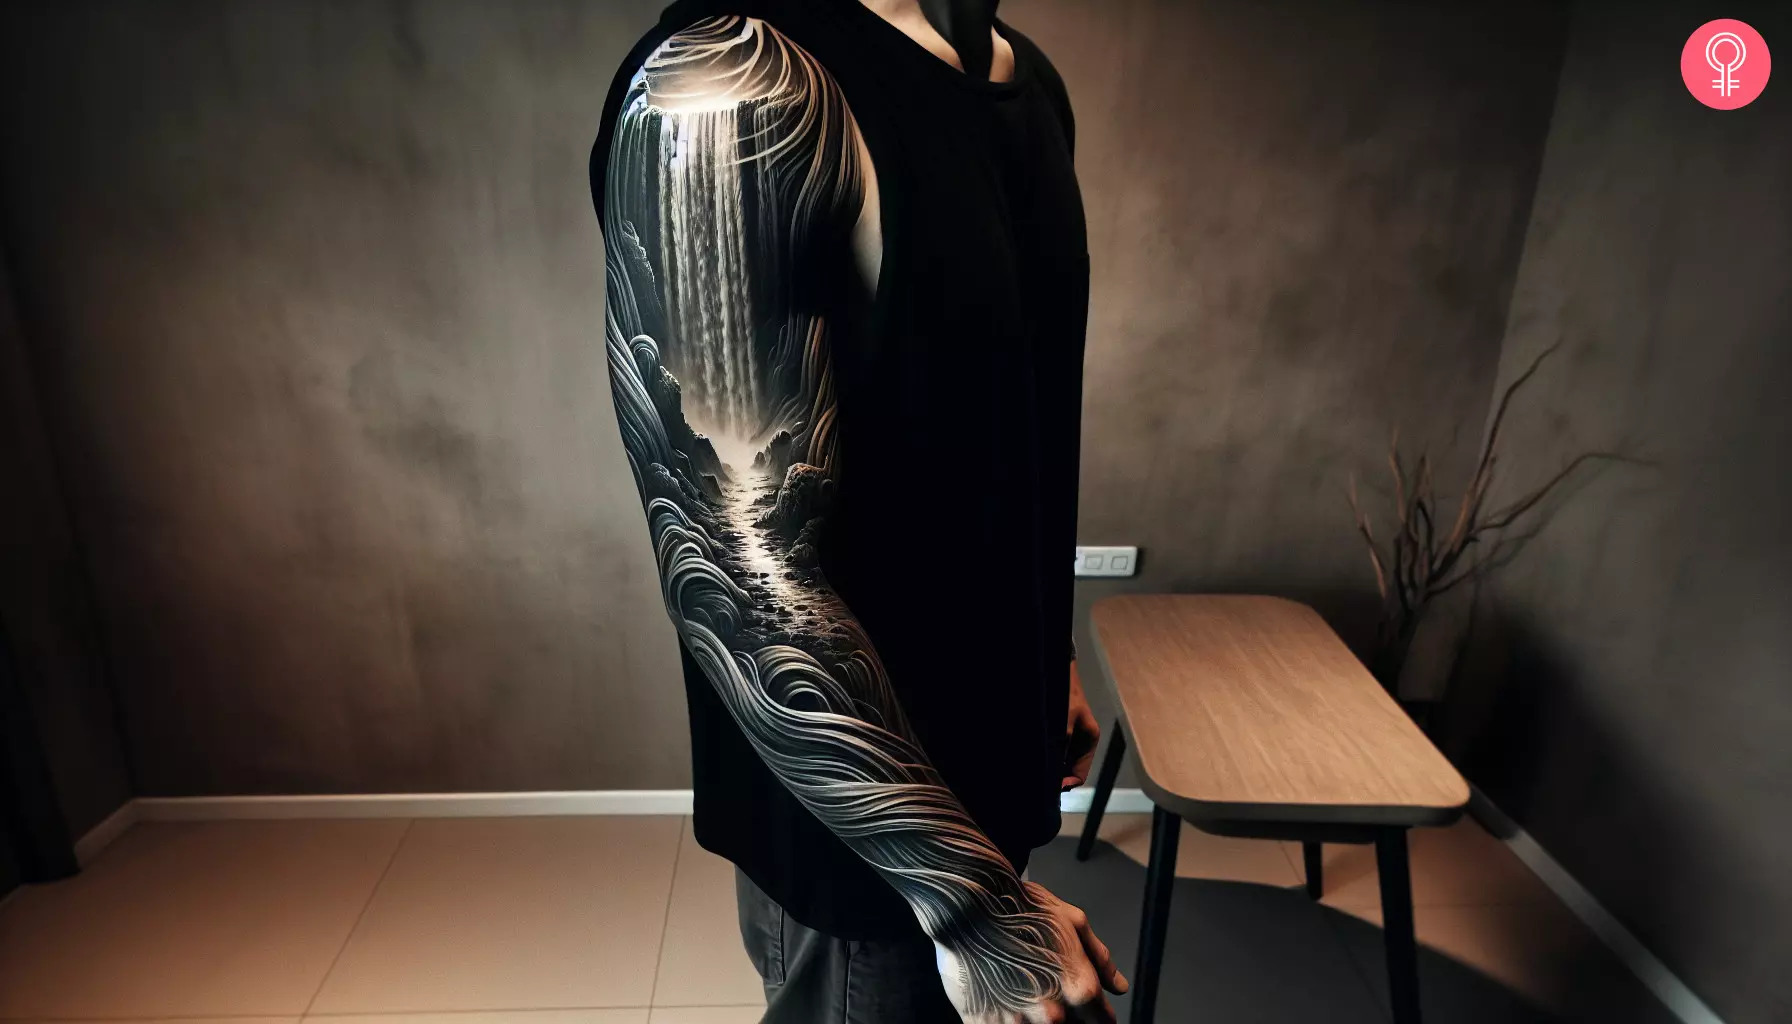 A waterfall tattoo on the arm sleeve of a man